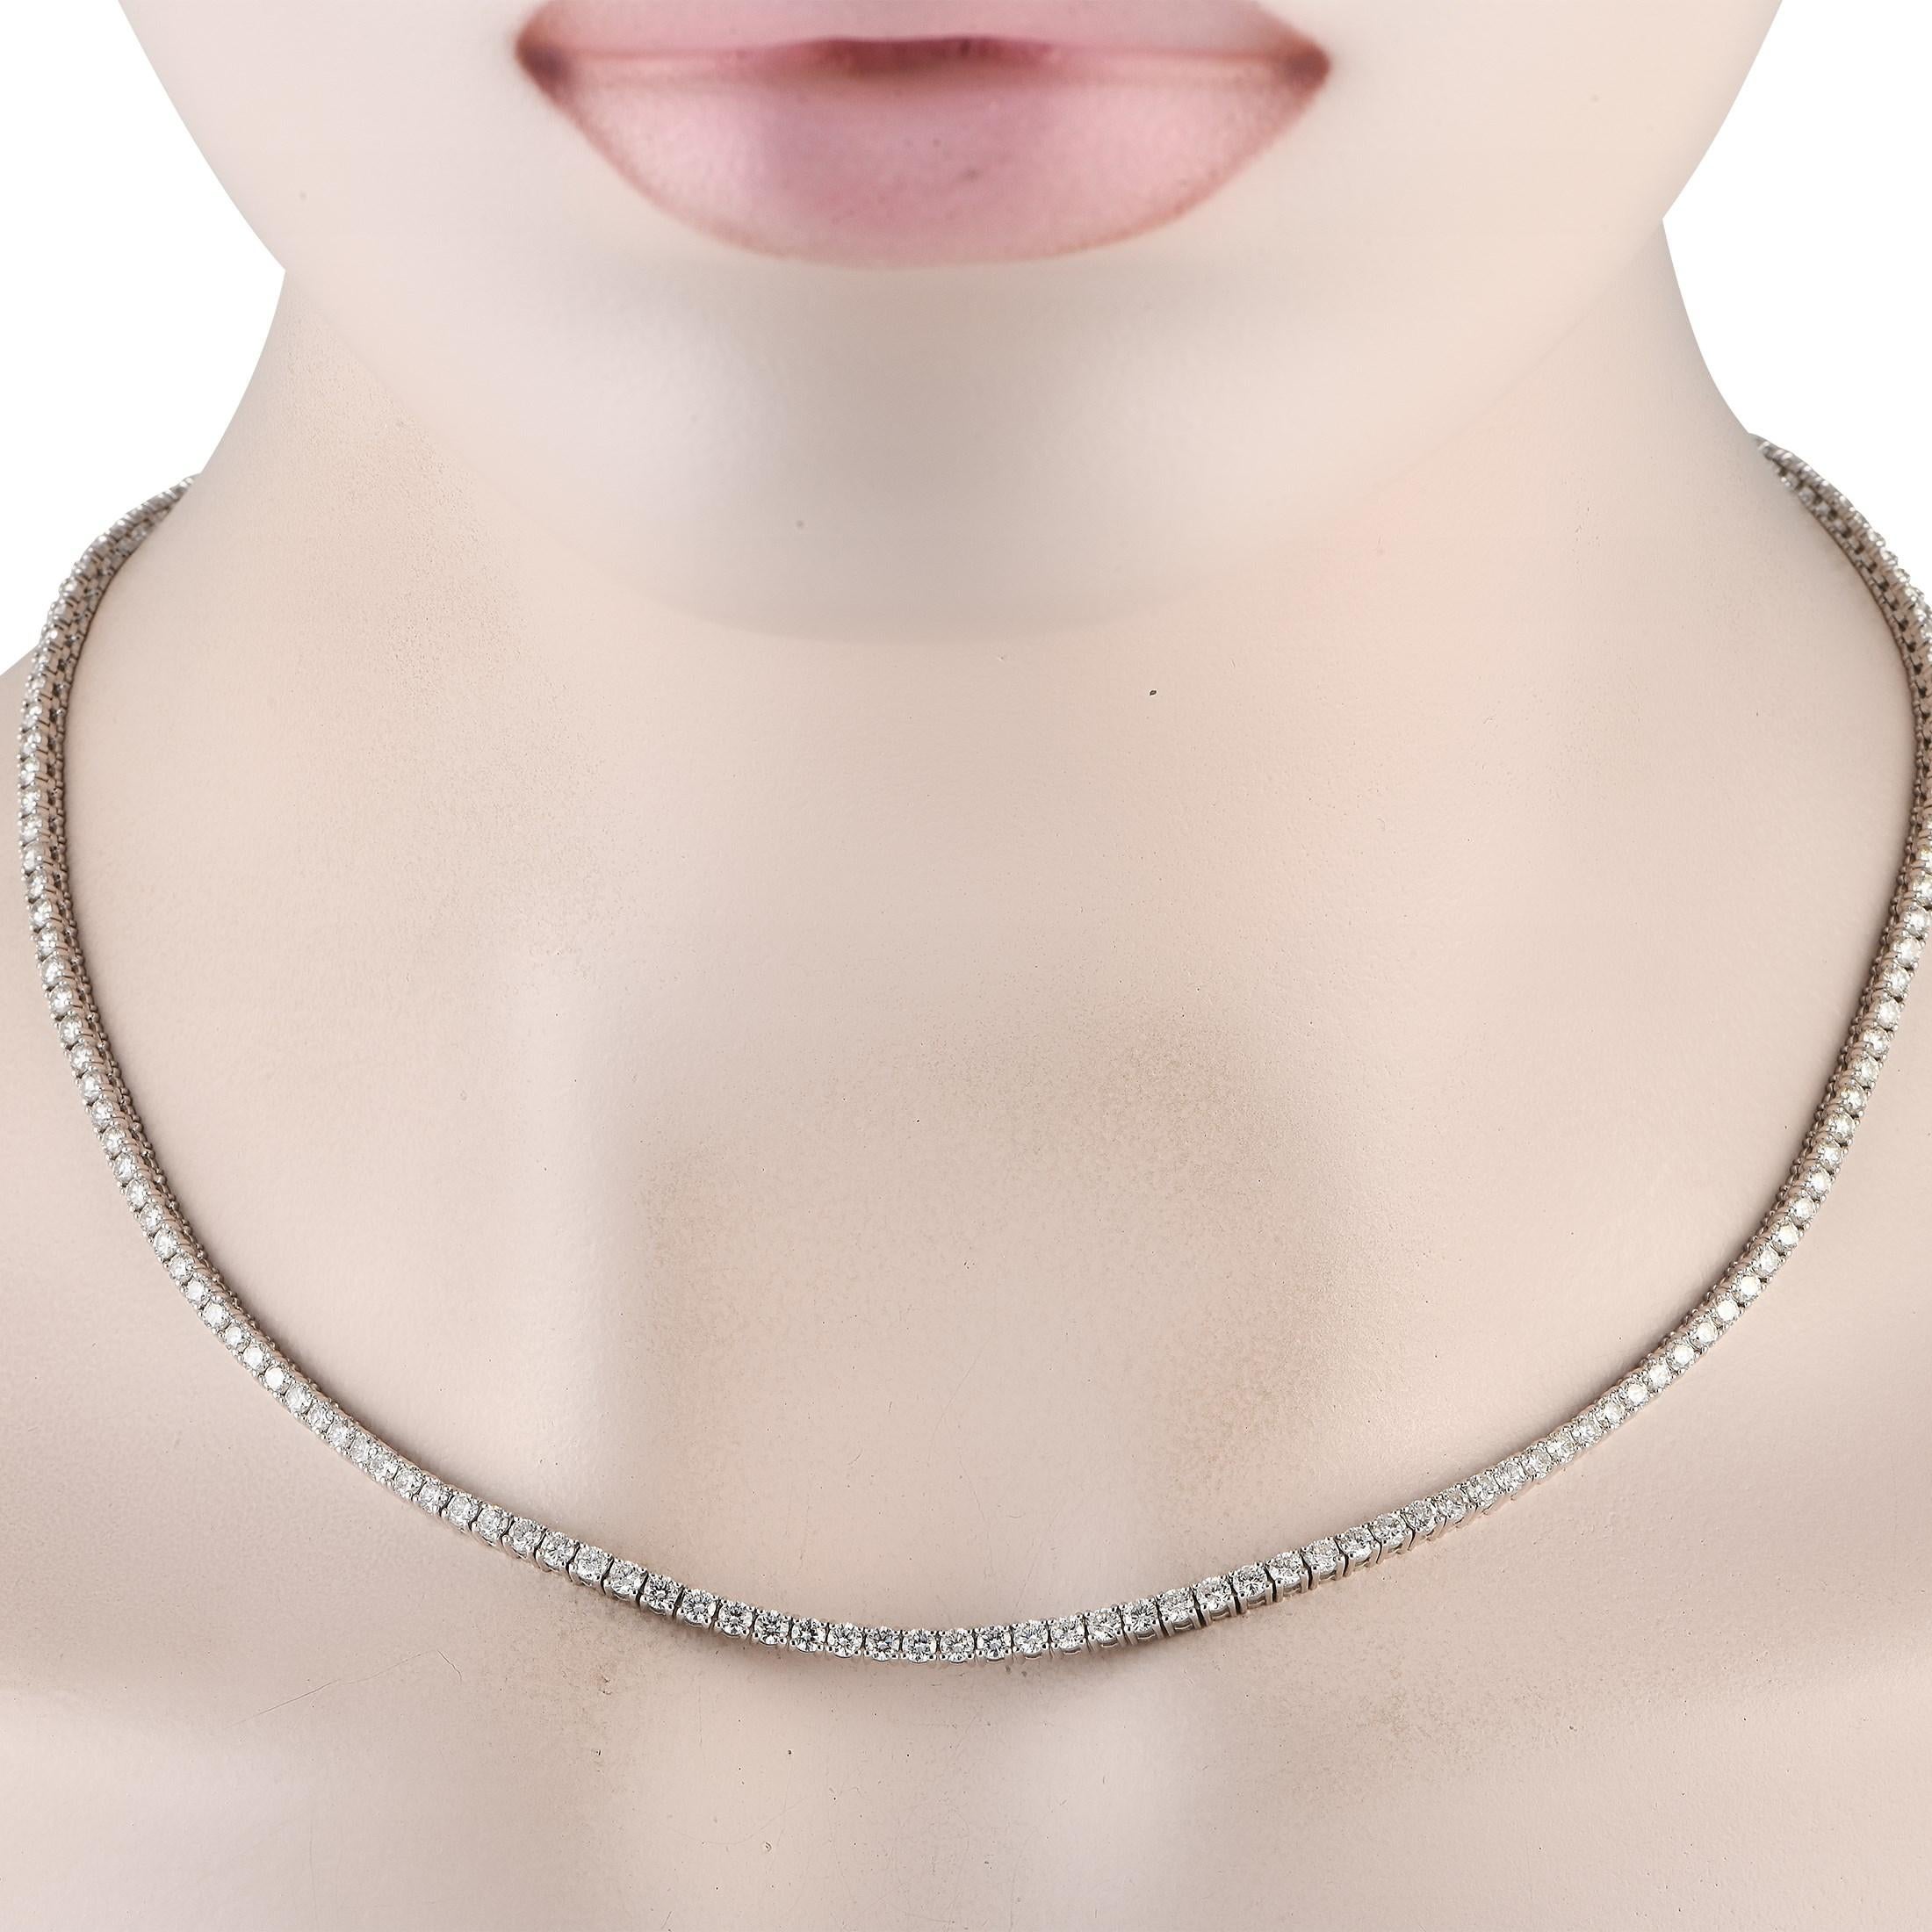 A series of sparkling round-cut Diamonds with a total weight of 9.84 carats make this luxury necklace endlessly impressive. Sleek, understated, and opulent, the simple 18K White Gold setting measures 18.5 long and allows the dazzling gemstones to